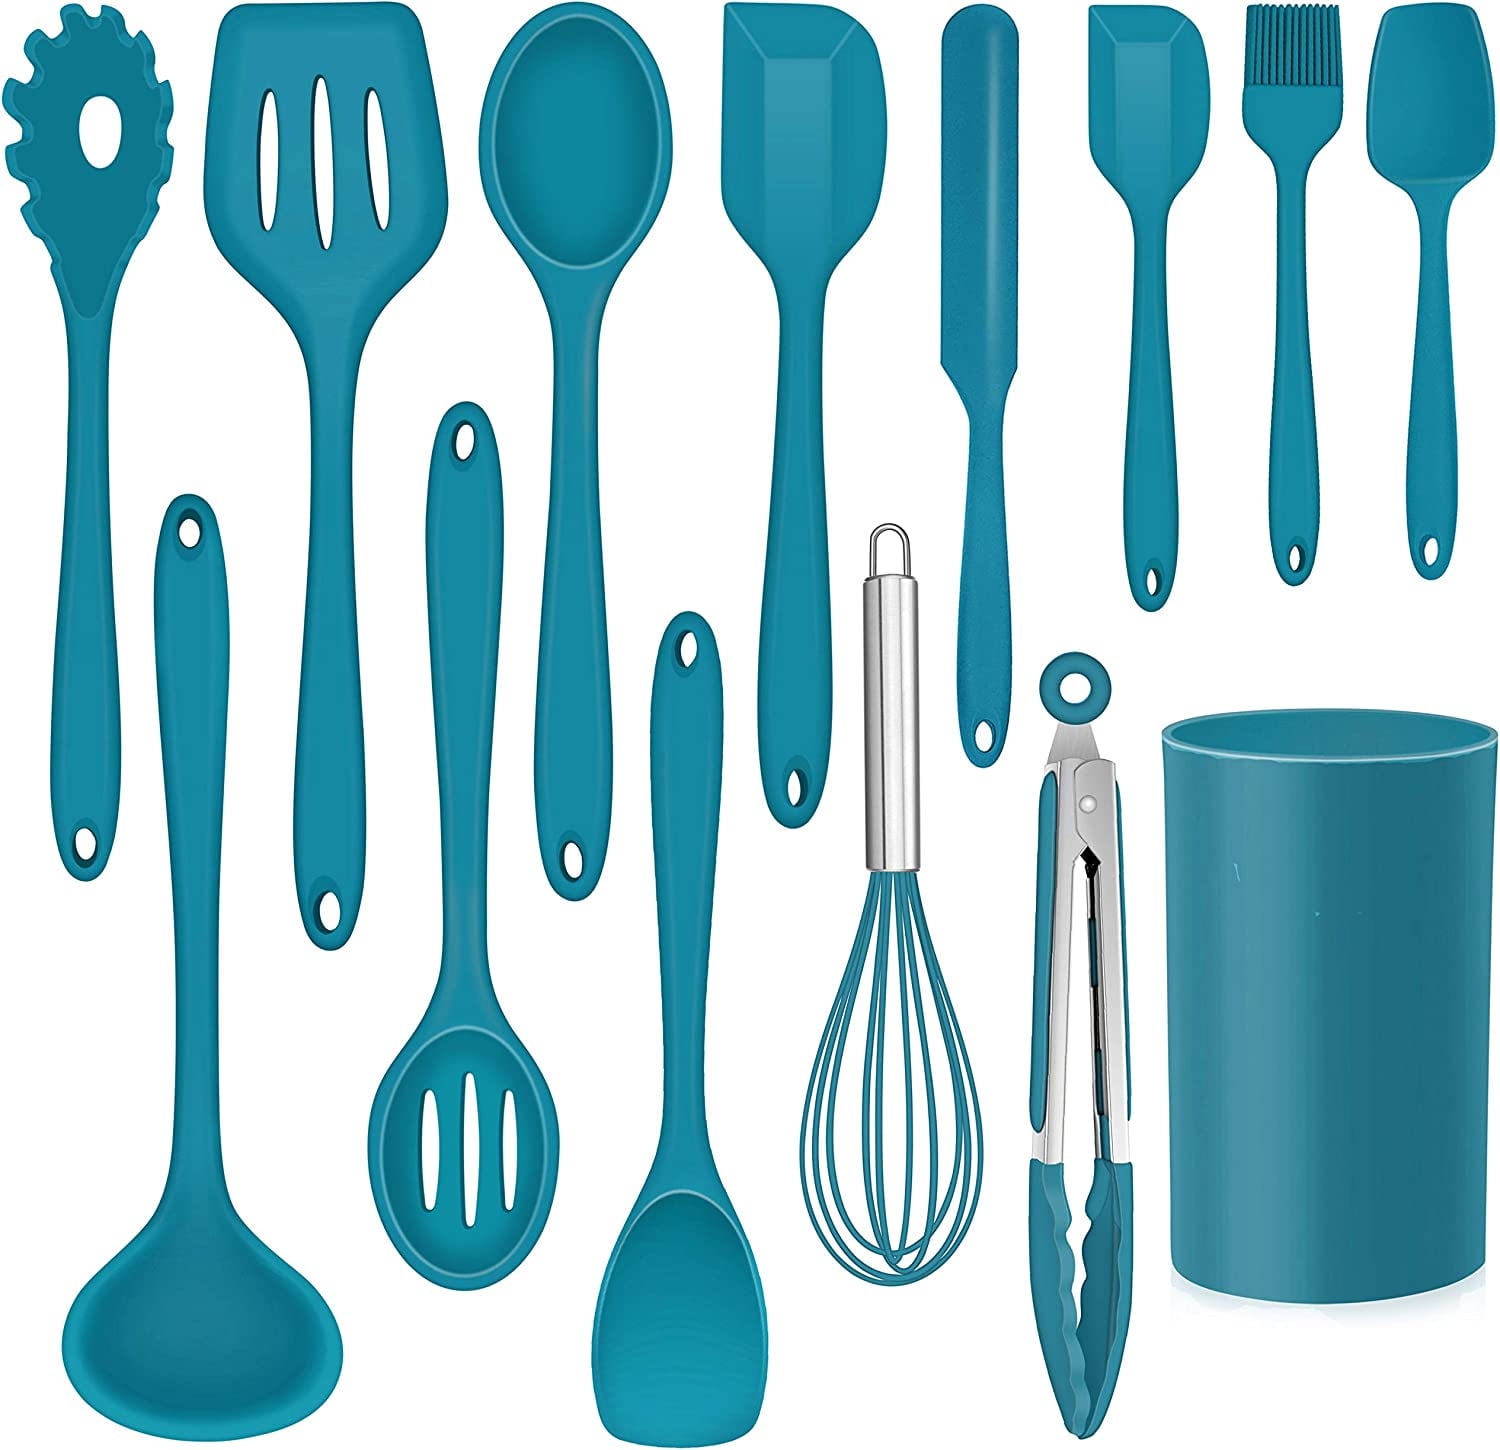  Homikit 20-Piece Kitchen Utensils Sets with Holder, Navy Blue  Teal Silicone Cooking Utensil Heat Resistant, Nonstick Cooking Tools  Include Spatula Spoon Turner Ladle Tong Whisk Grater, Dishwasher Safe :  Home 